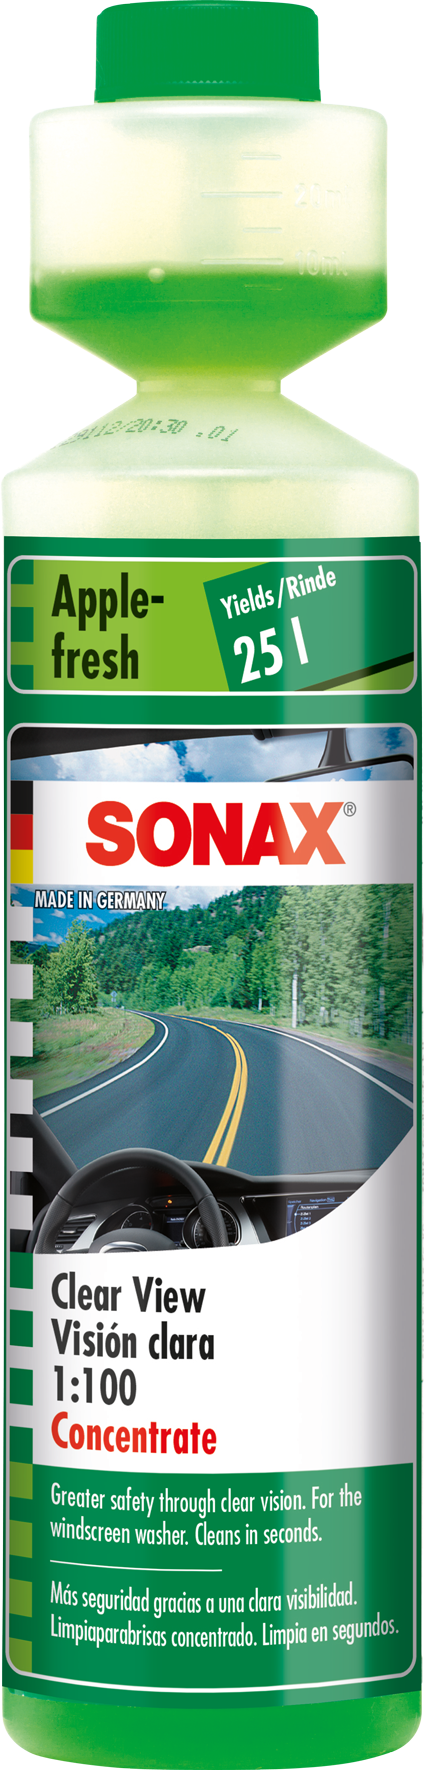 Product image download - SONAX Media - site 4